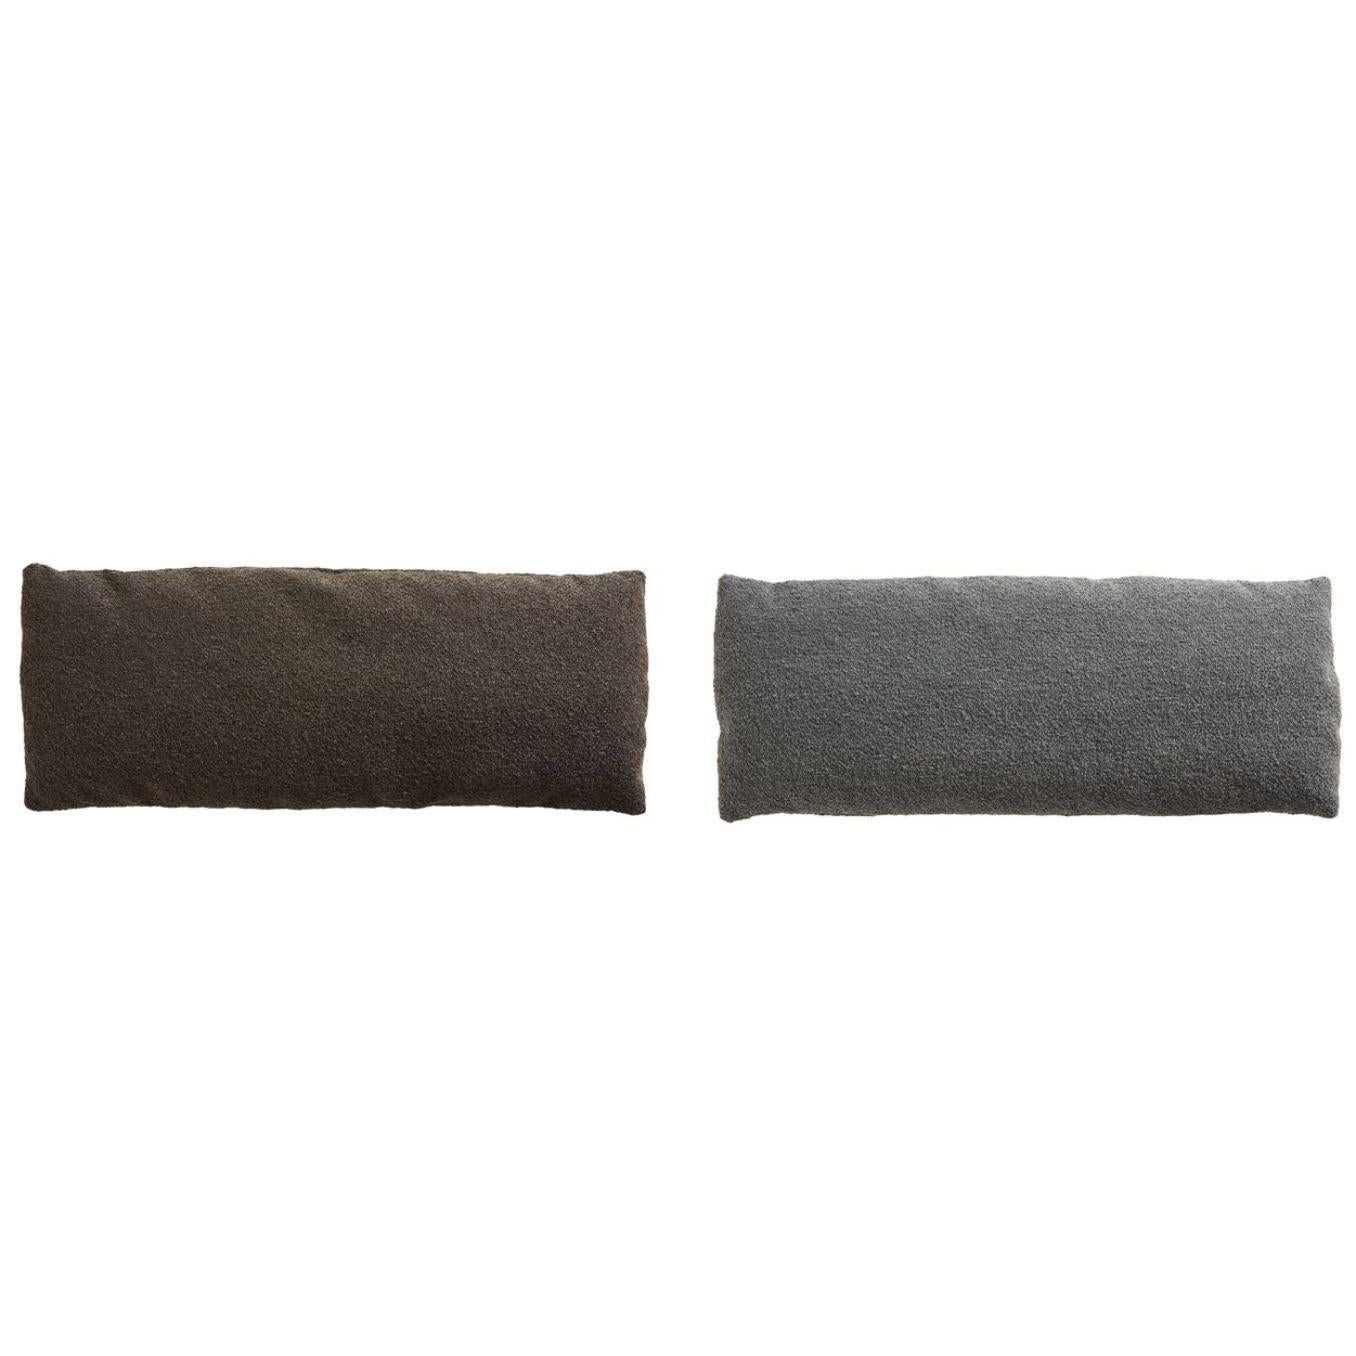 Set of 2 dark brown / grey level pillows by Msds Studio
Materials: Boucle
Dimensions: D 23.5 x W 67 x H 8.5 cm
Also available in different colours

The founders, Mia and Torben Koed, decided to put their 30 years of experience into a new